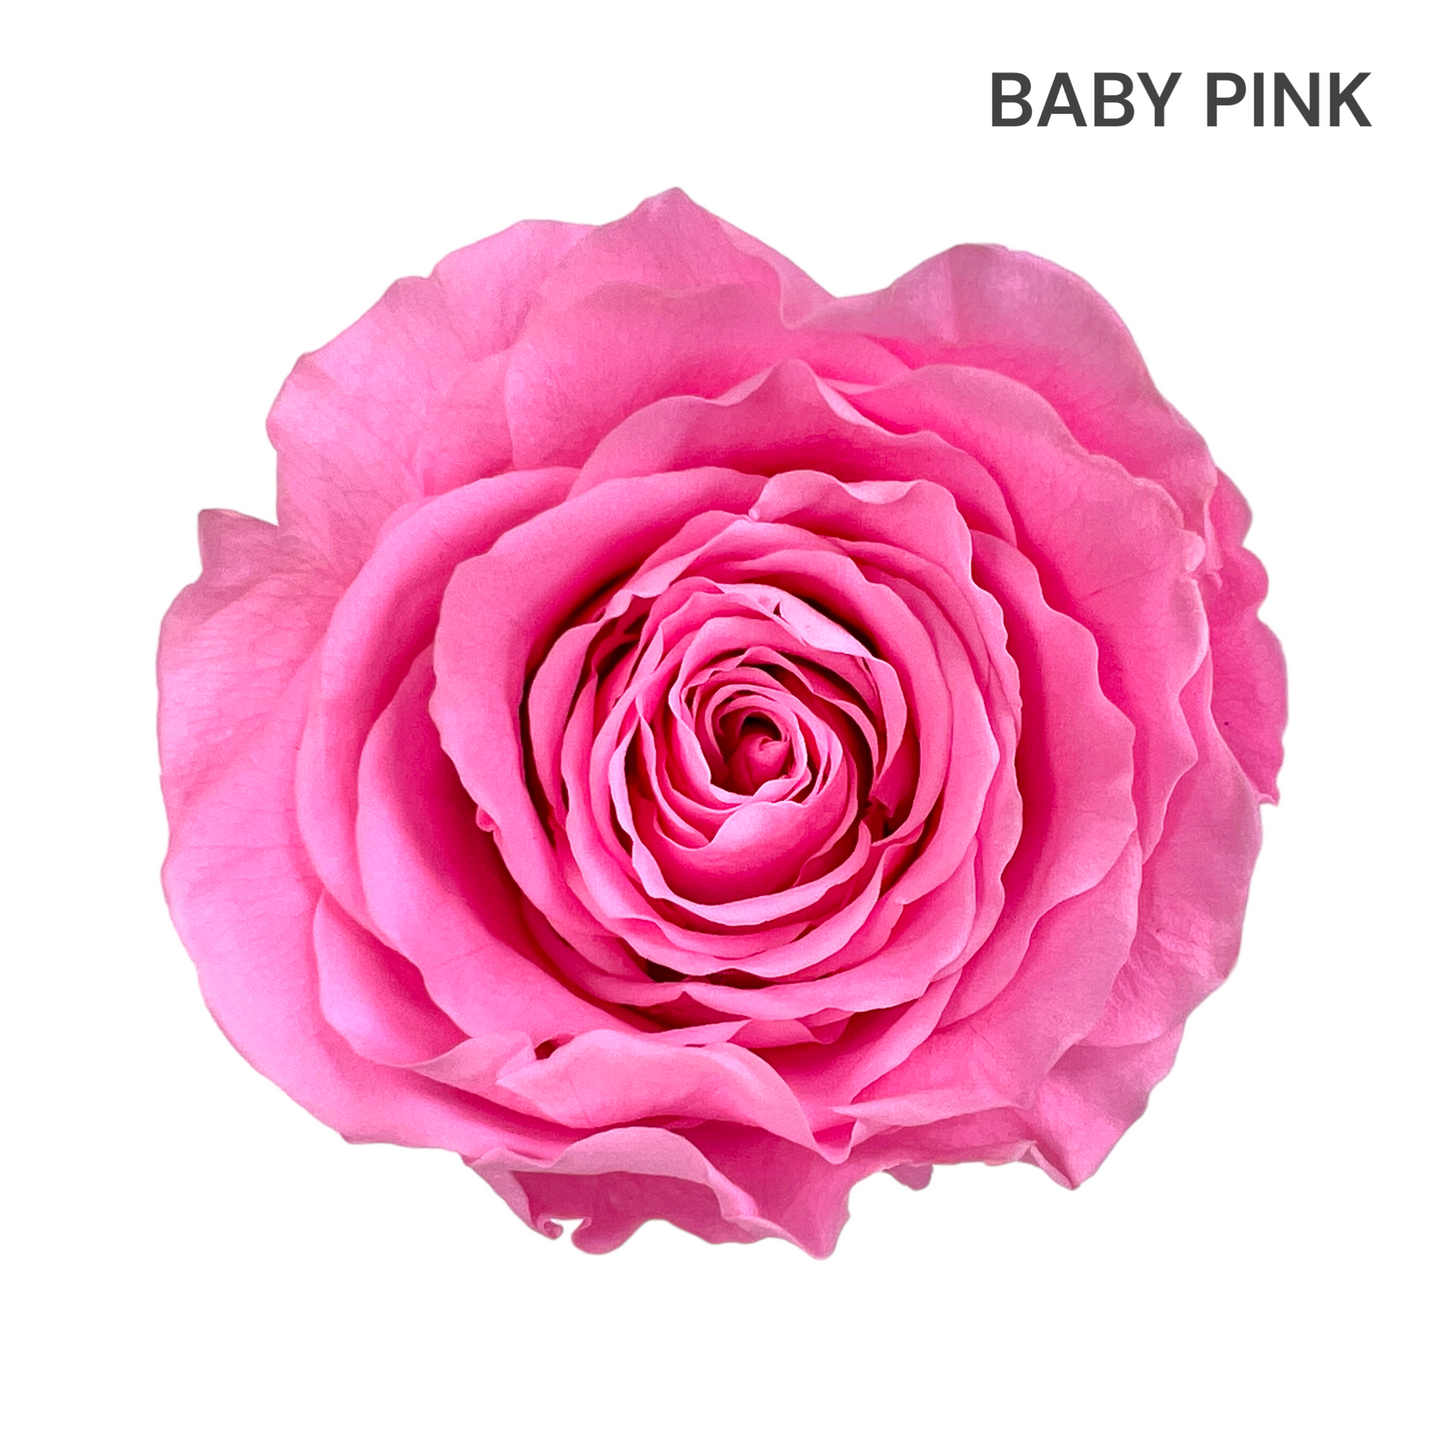 Classic Round Box Rose Collection | 20-24 Roses